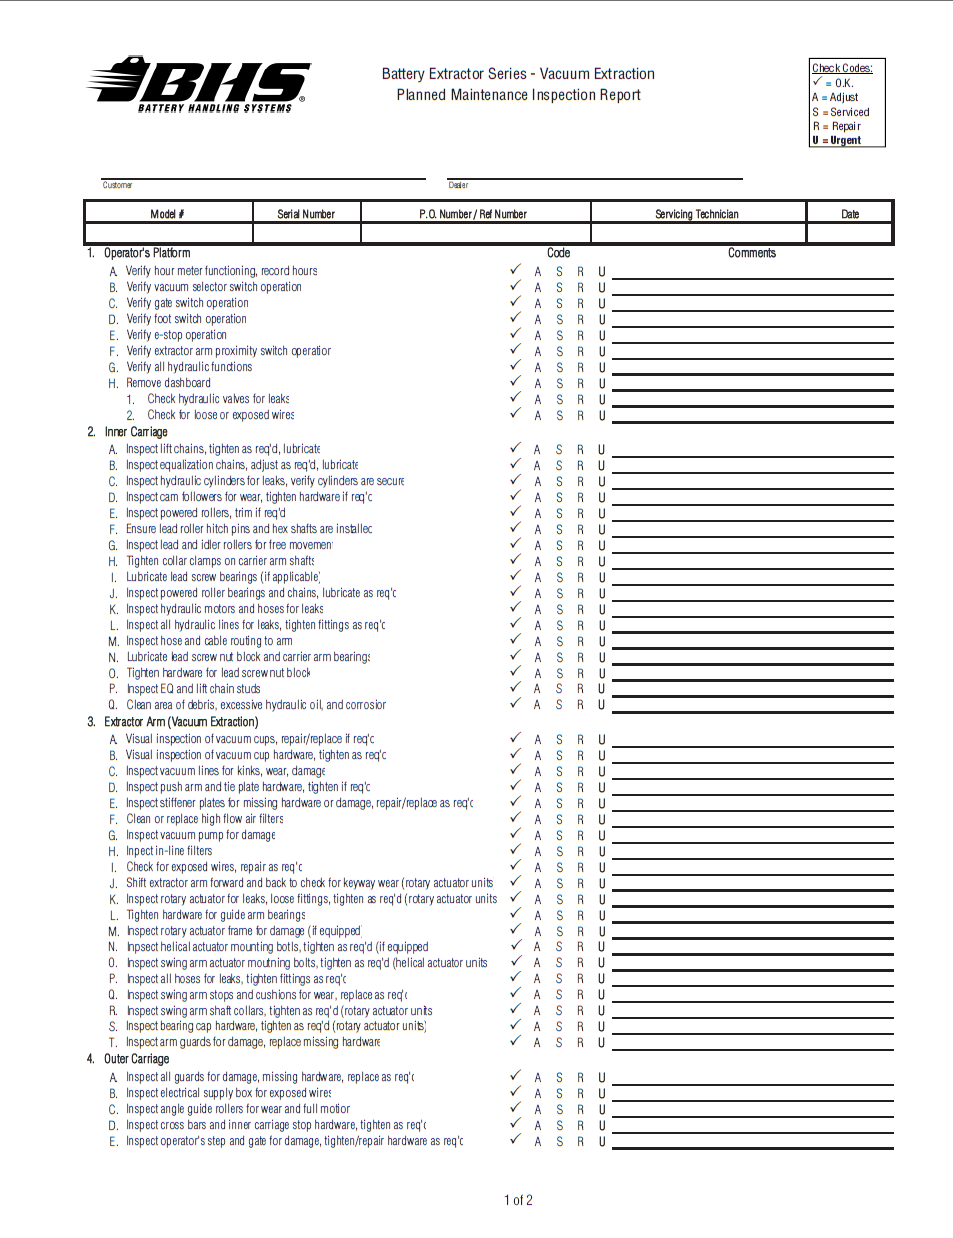 Battery Extractor Series - Vacuum Extraction Planned Maintenance Inspection Report Page1